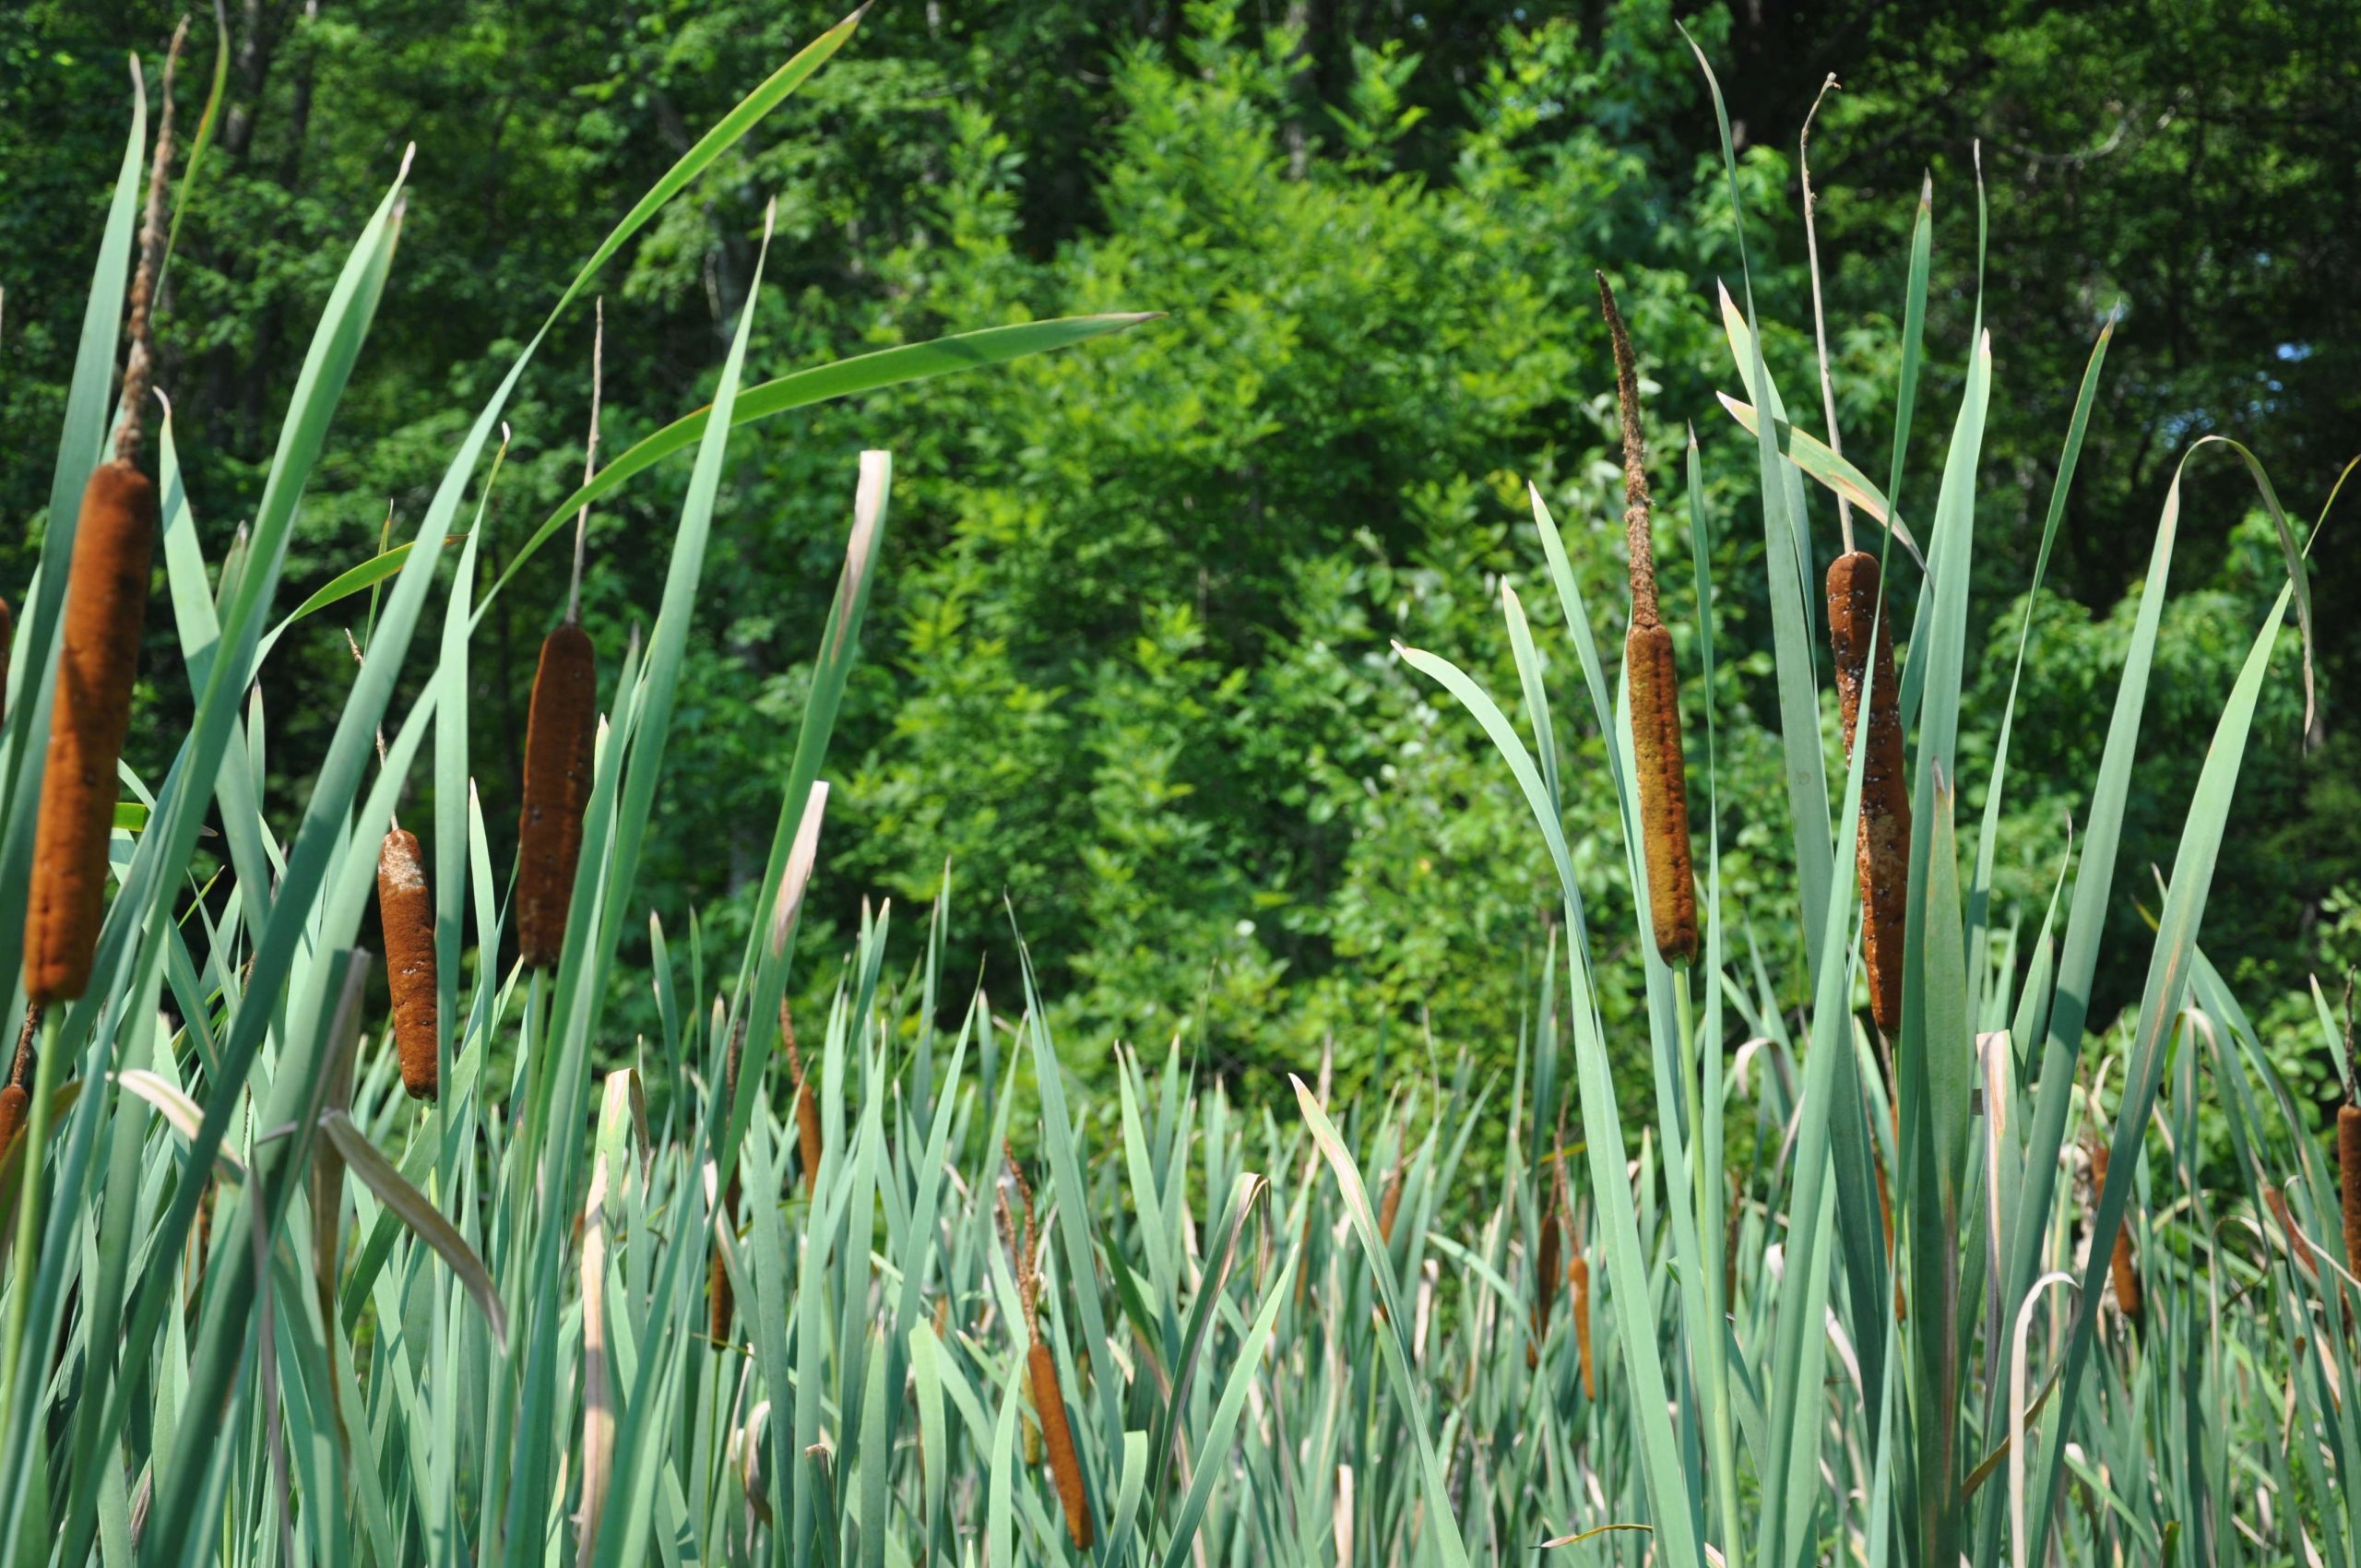 Cattail (Typha latifolia)
Cattail is a native shoreline plant easily distinguished by its brown spike-like flower that gets fuzzy in winter. Cattails are not as often sought by bass fishermen because they provide very little in-water habitat.